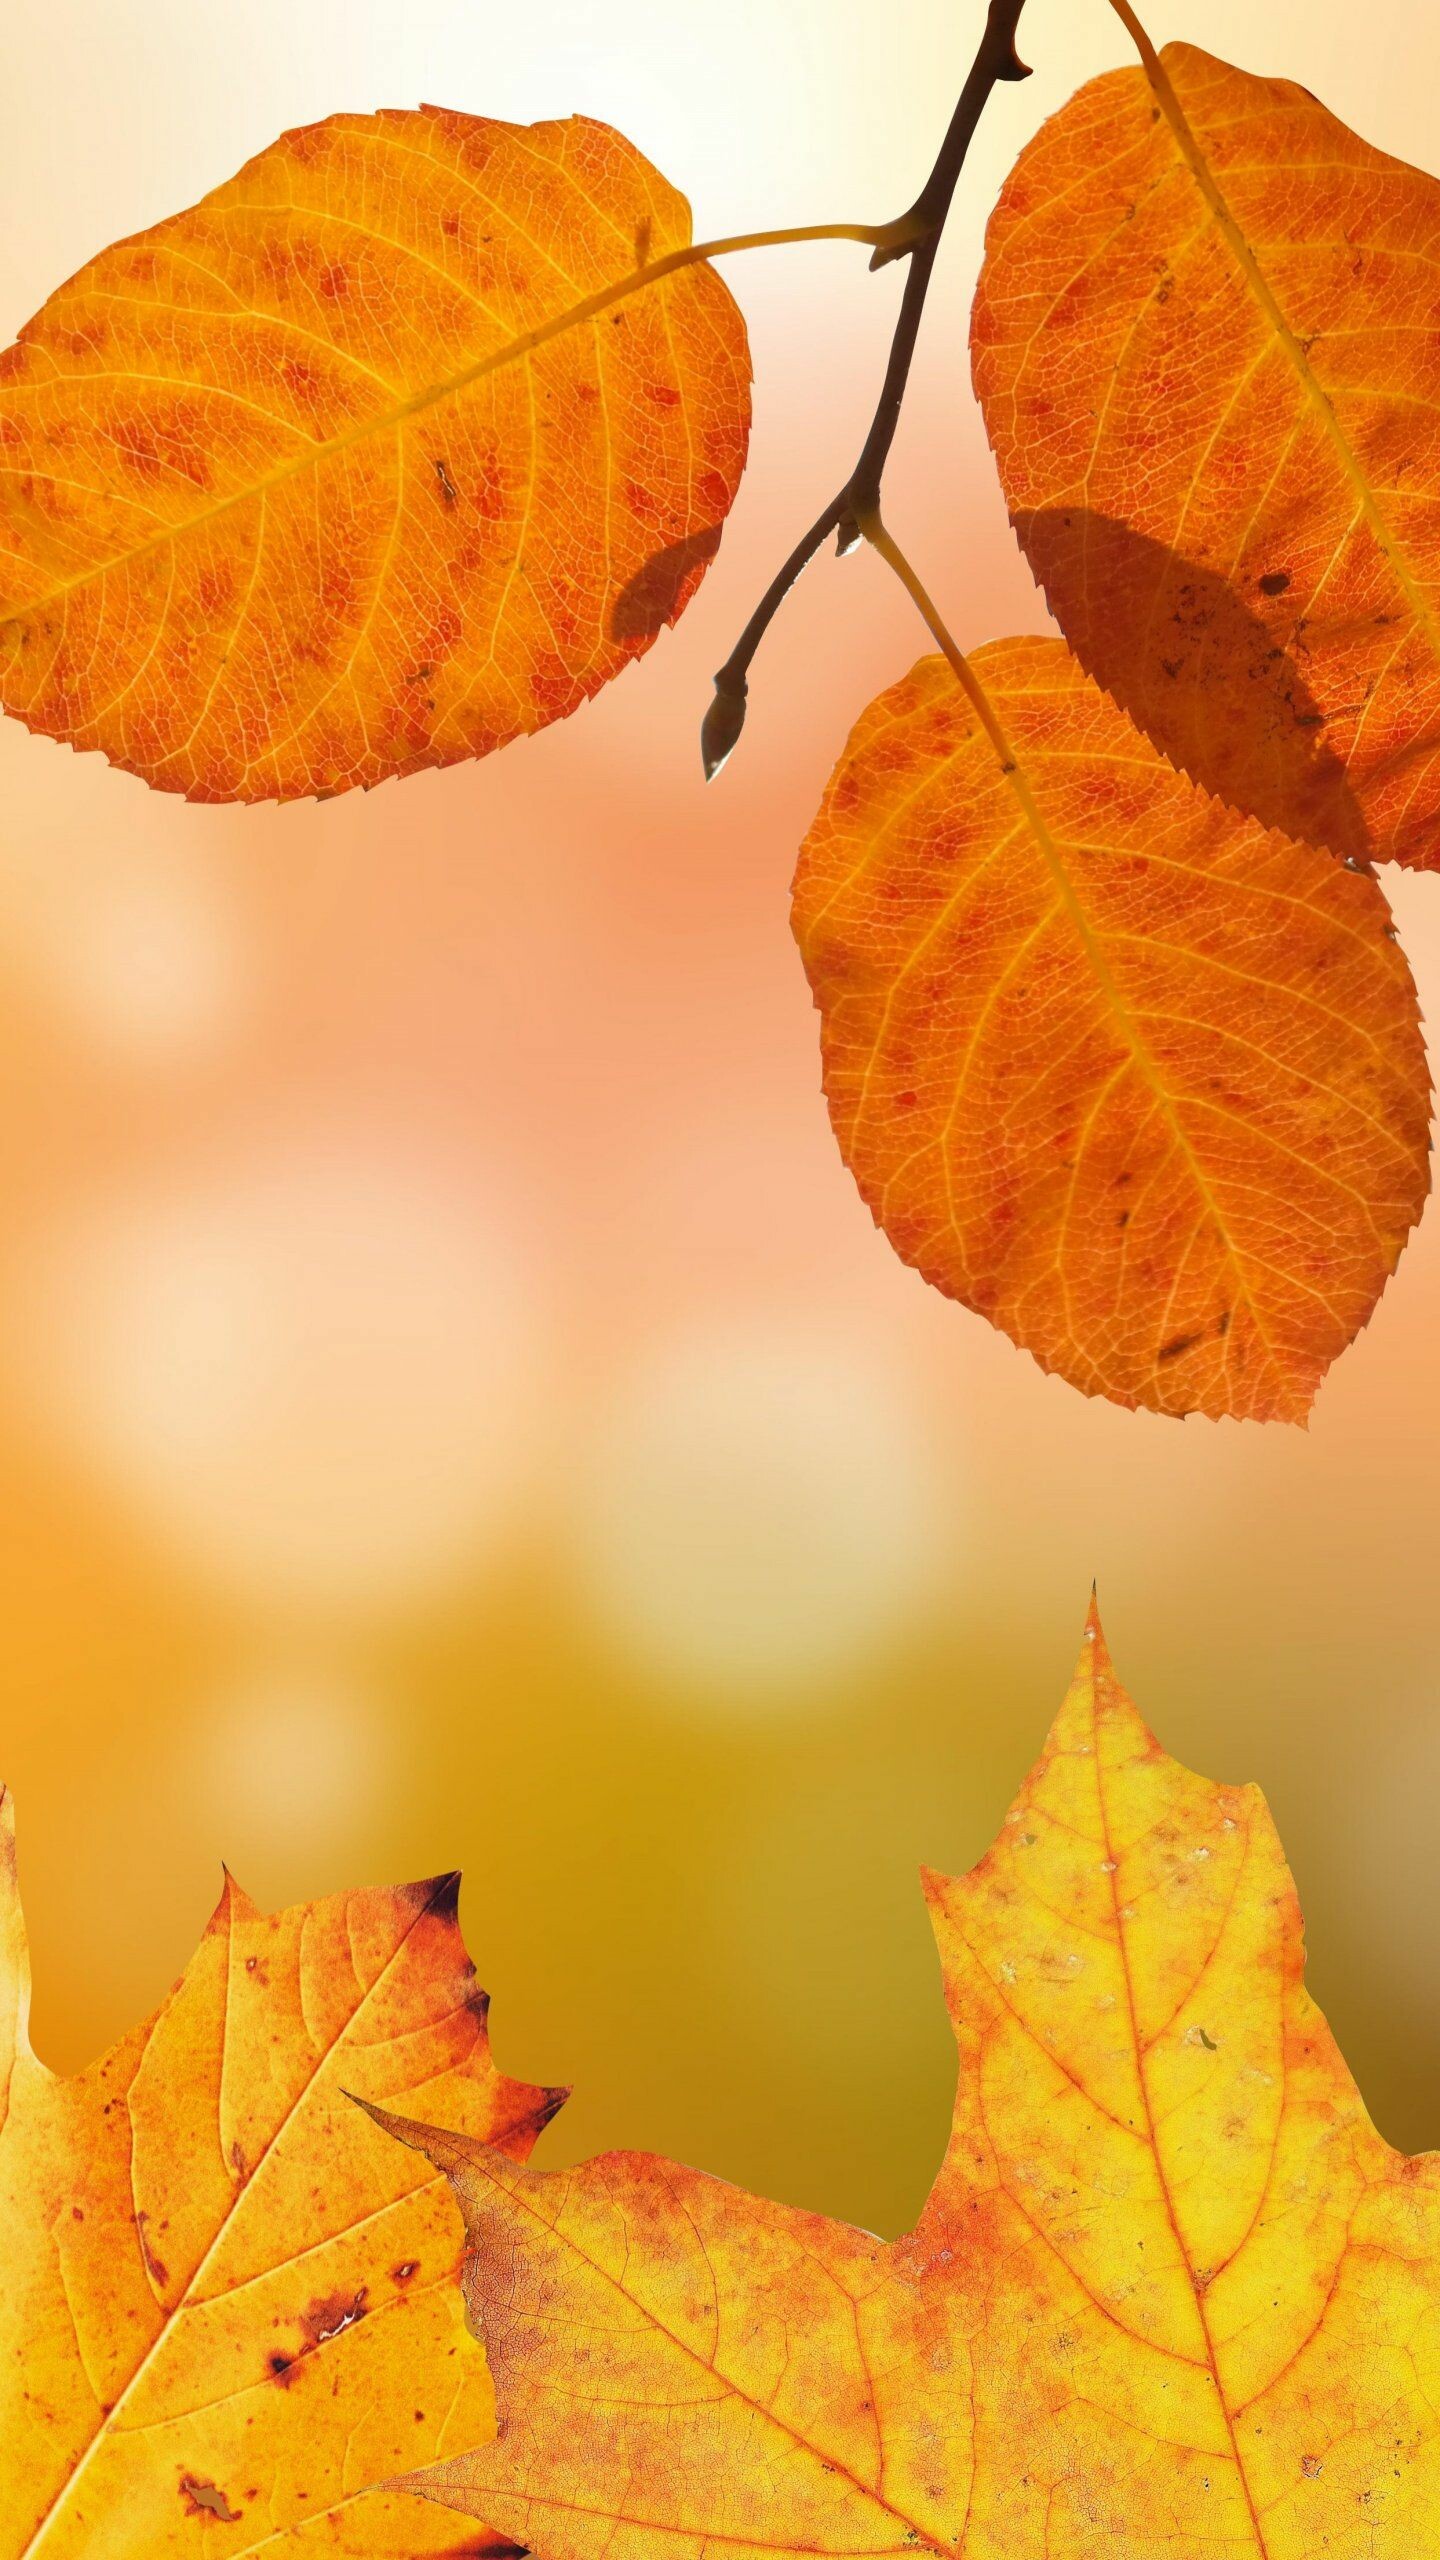 Autumn: The veins of brightly colored maple leaves, Fall beauty. 1440x2560 HD Background.